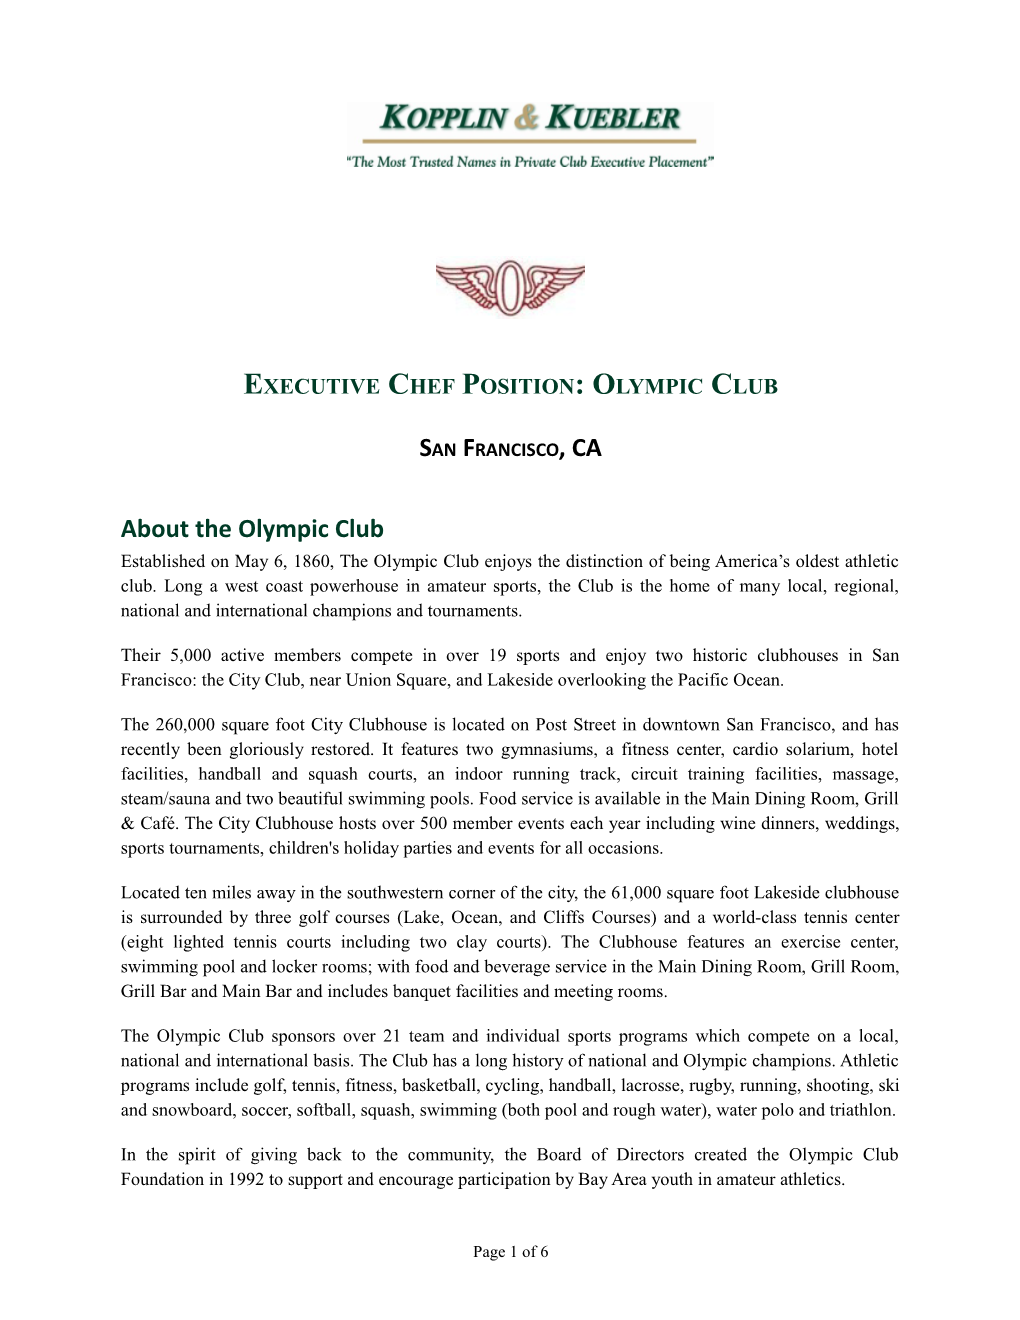 Executive Chef Position: Olympic Club